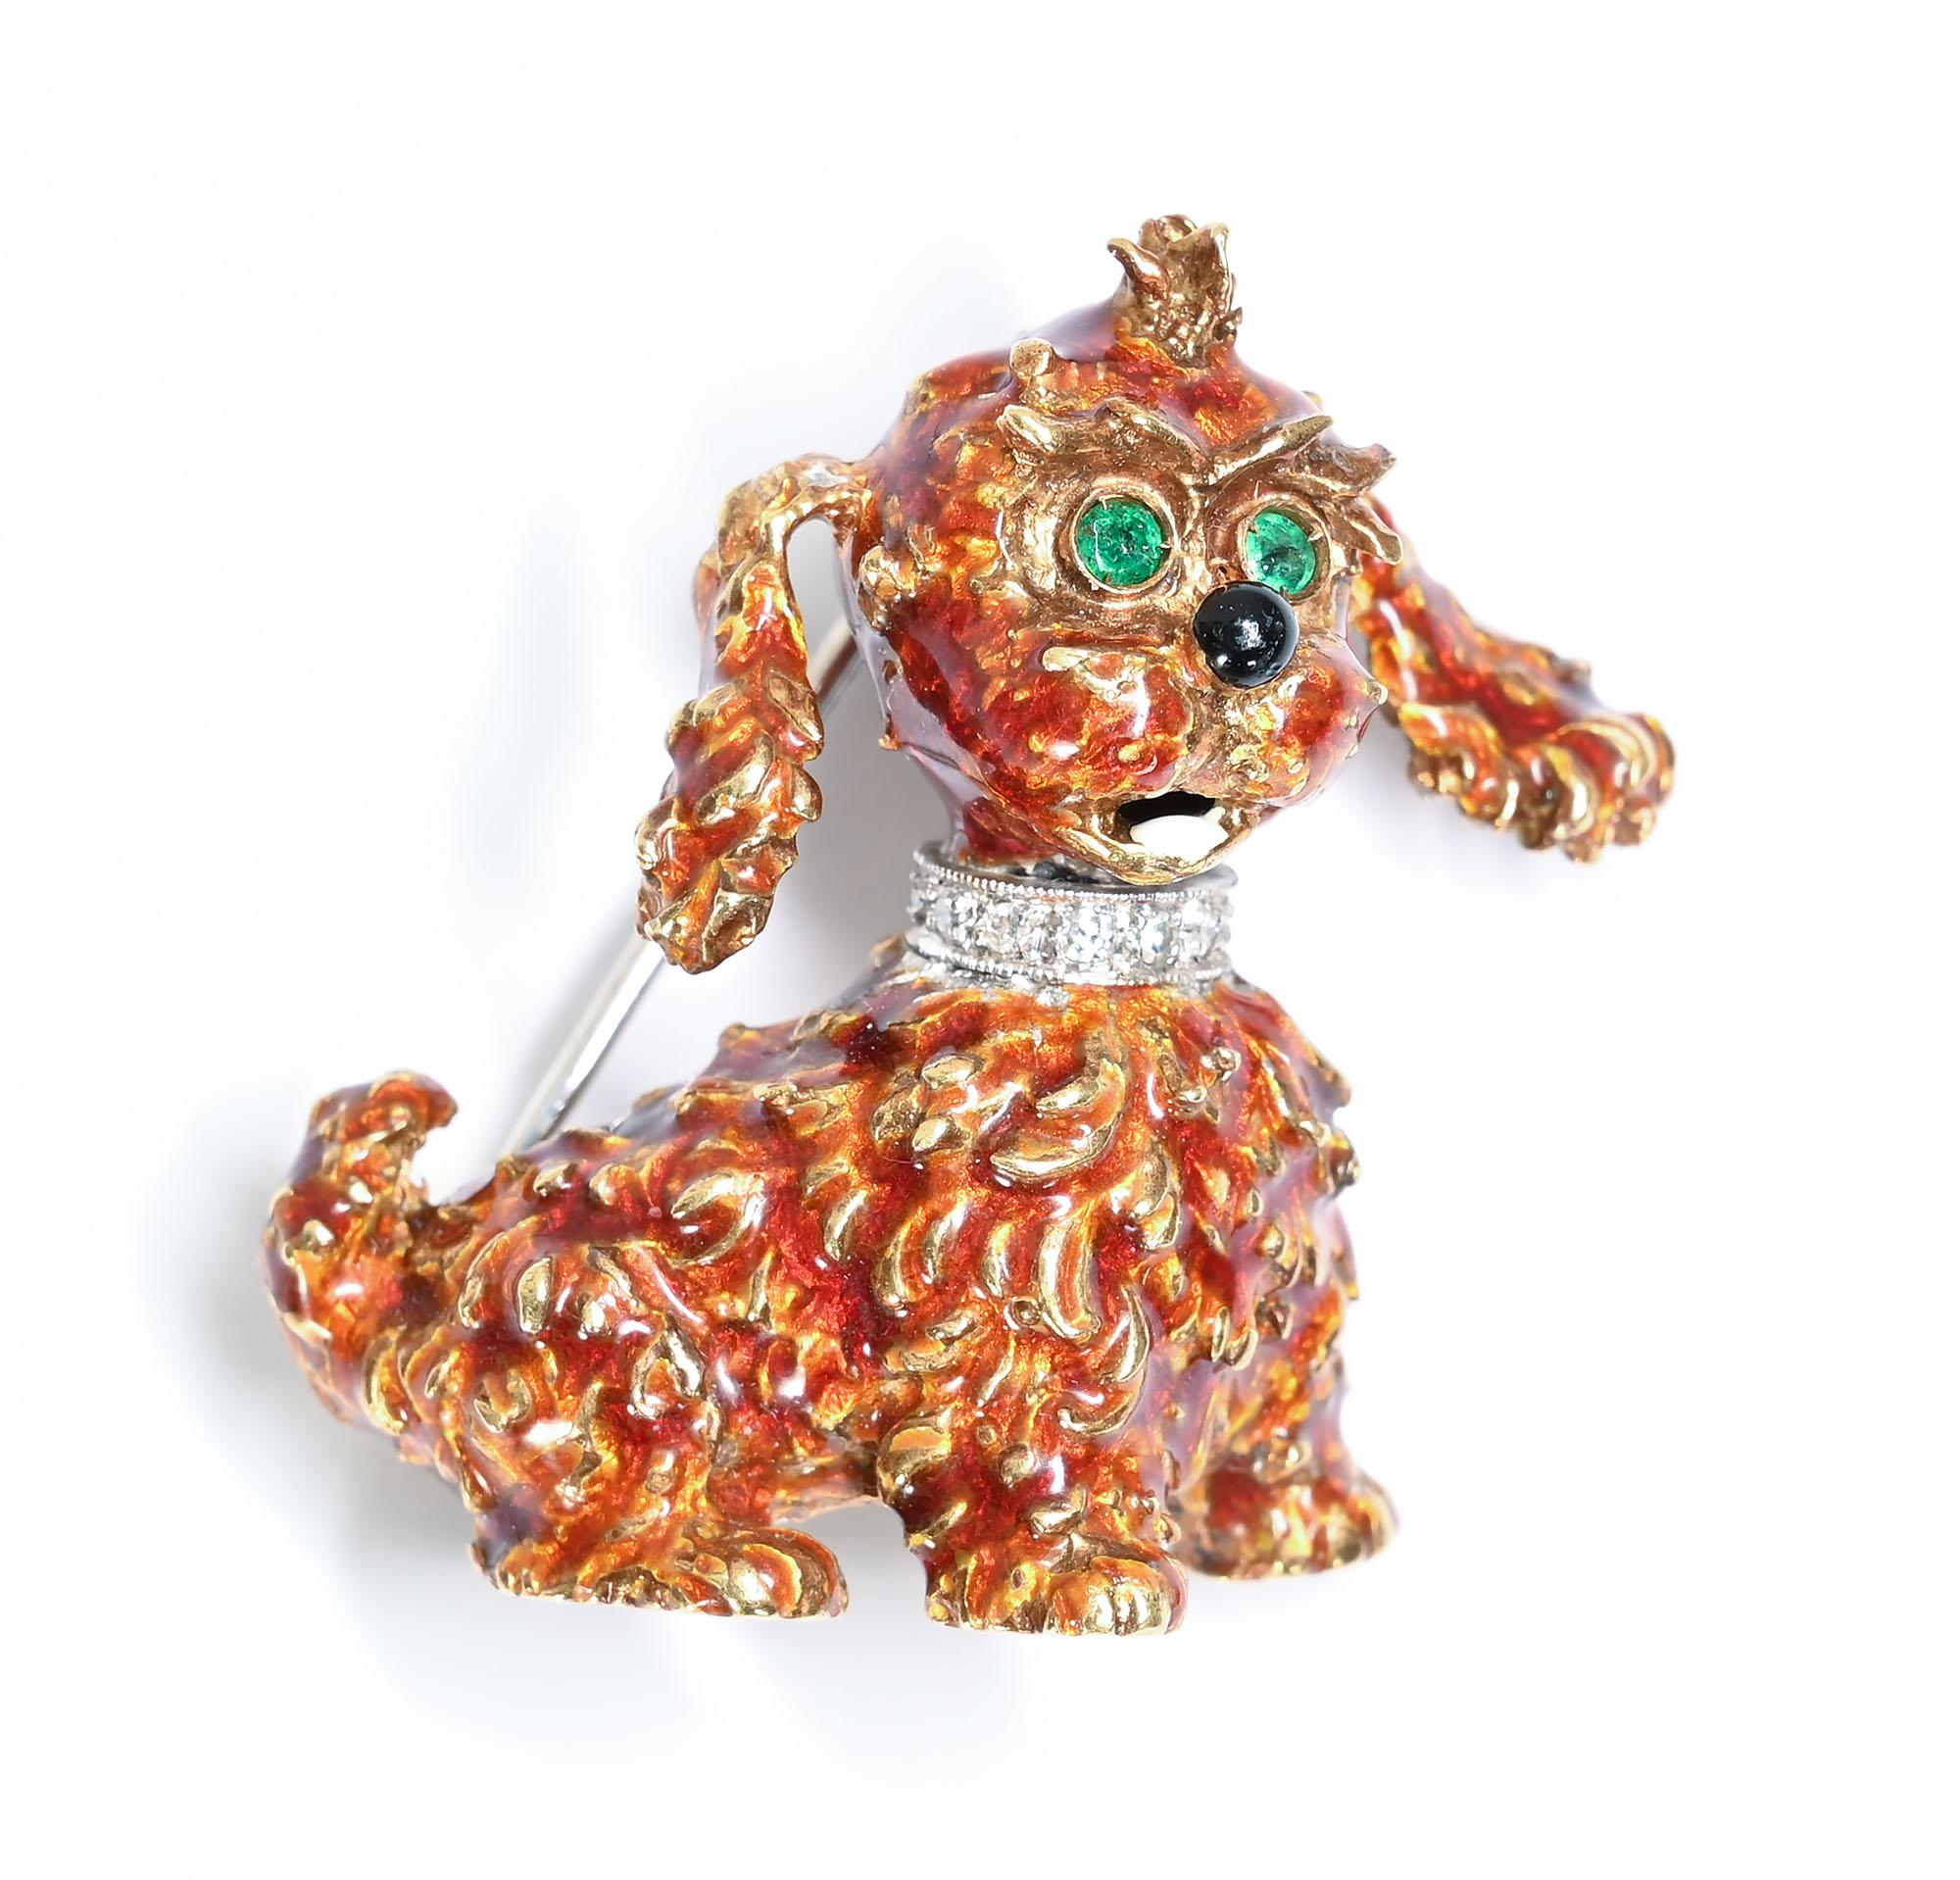 Could this pooch be any cuter? The poodle (?) has hair of red enamel; emerald eyes; a black onyx nose and a diamond collar. Long, waving ears are indicative of his (or her) playful character. The brooch measures 1 1/8 inches wide and 1 1/2 inches